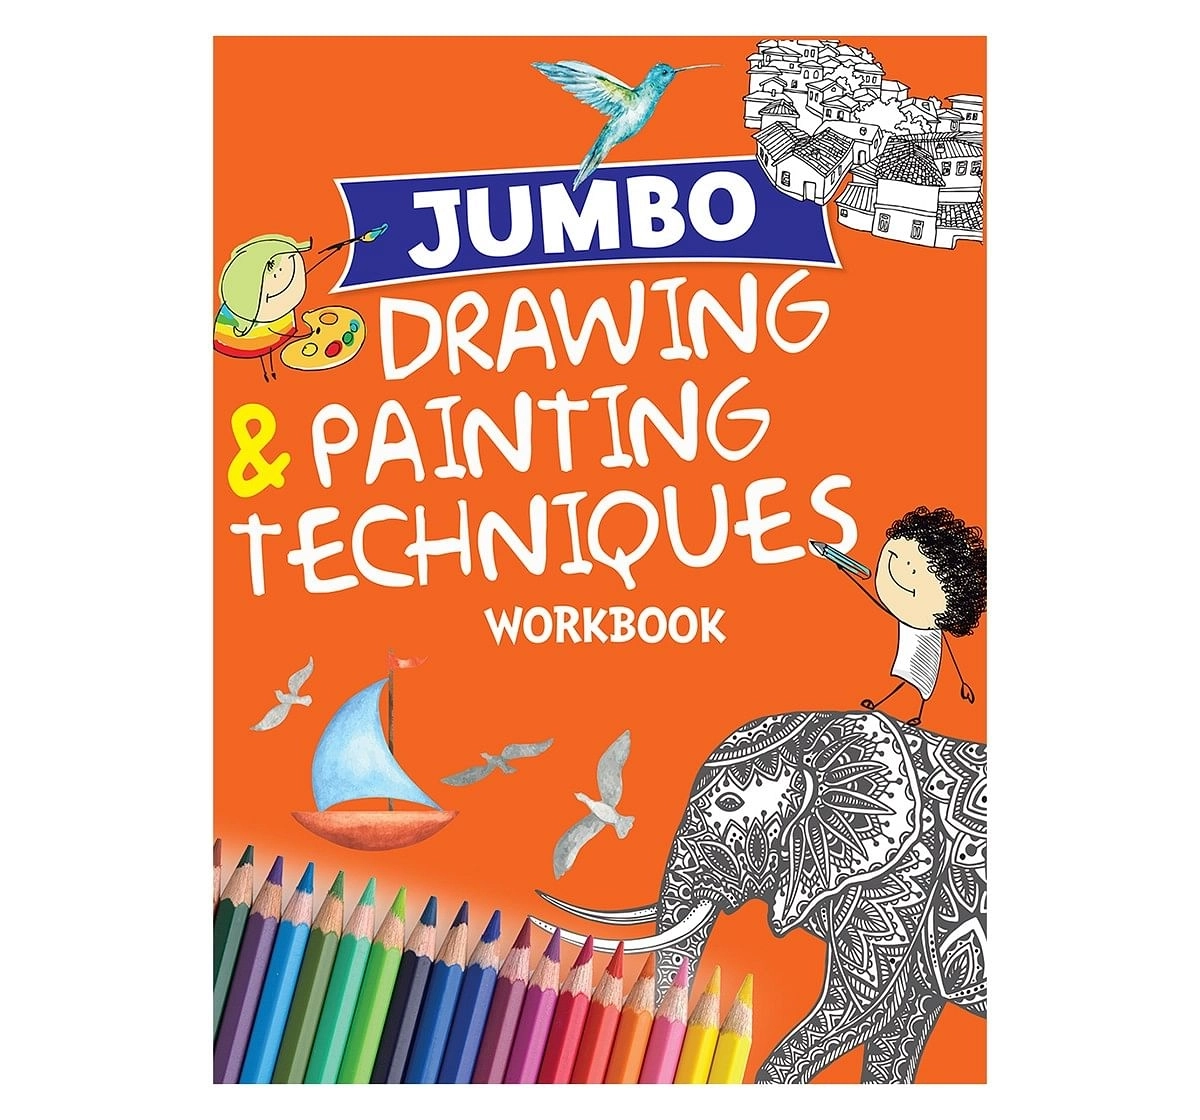 Drawing & Painting : Jumbo Drawing & Painting Techniques Workbook, 128 Pages Book, Paperback